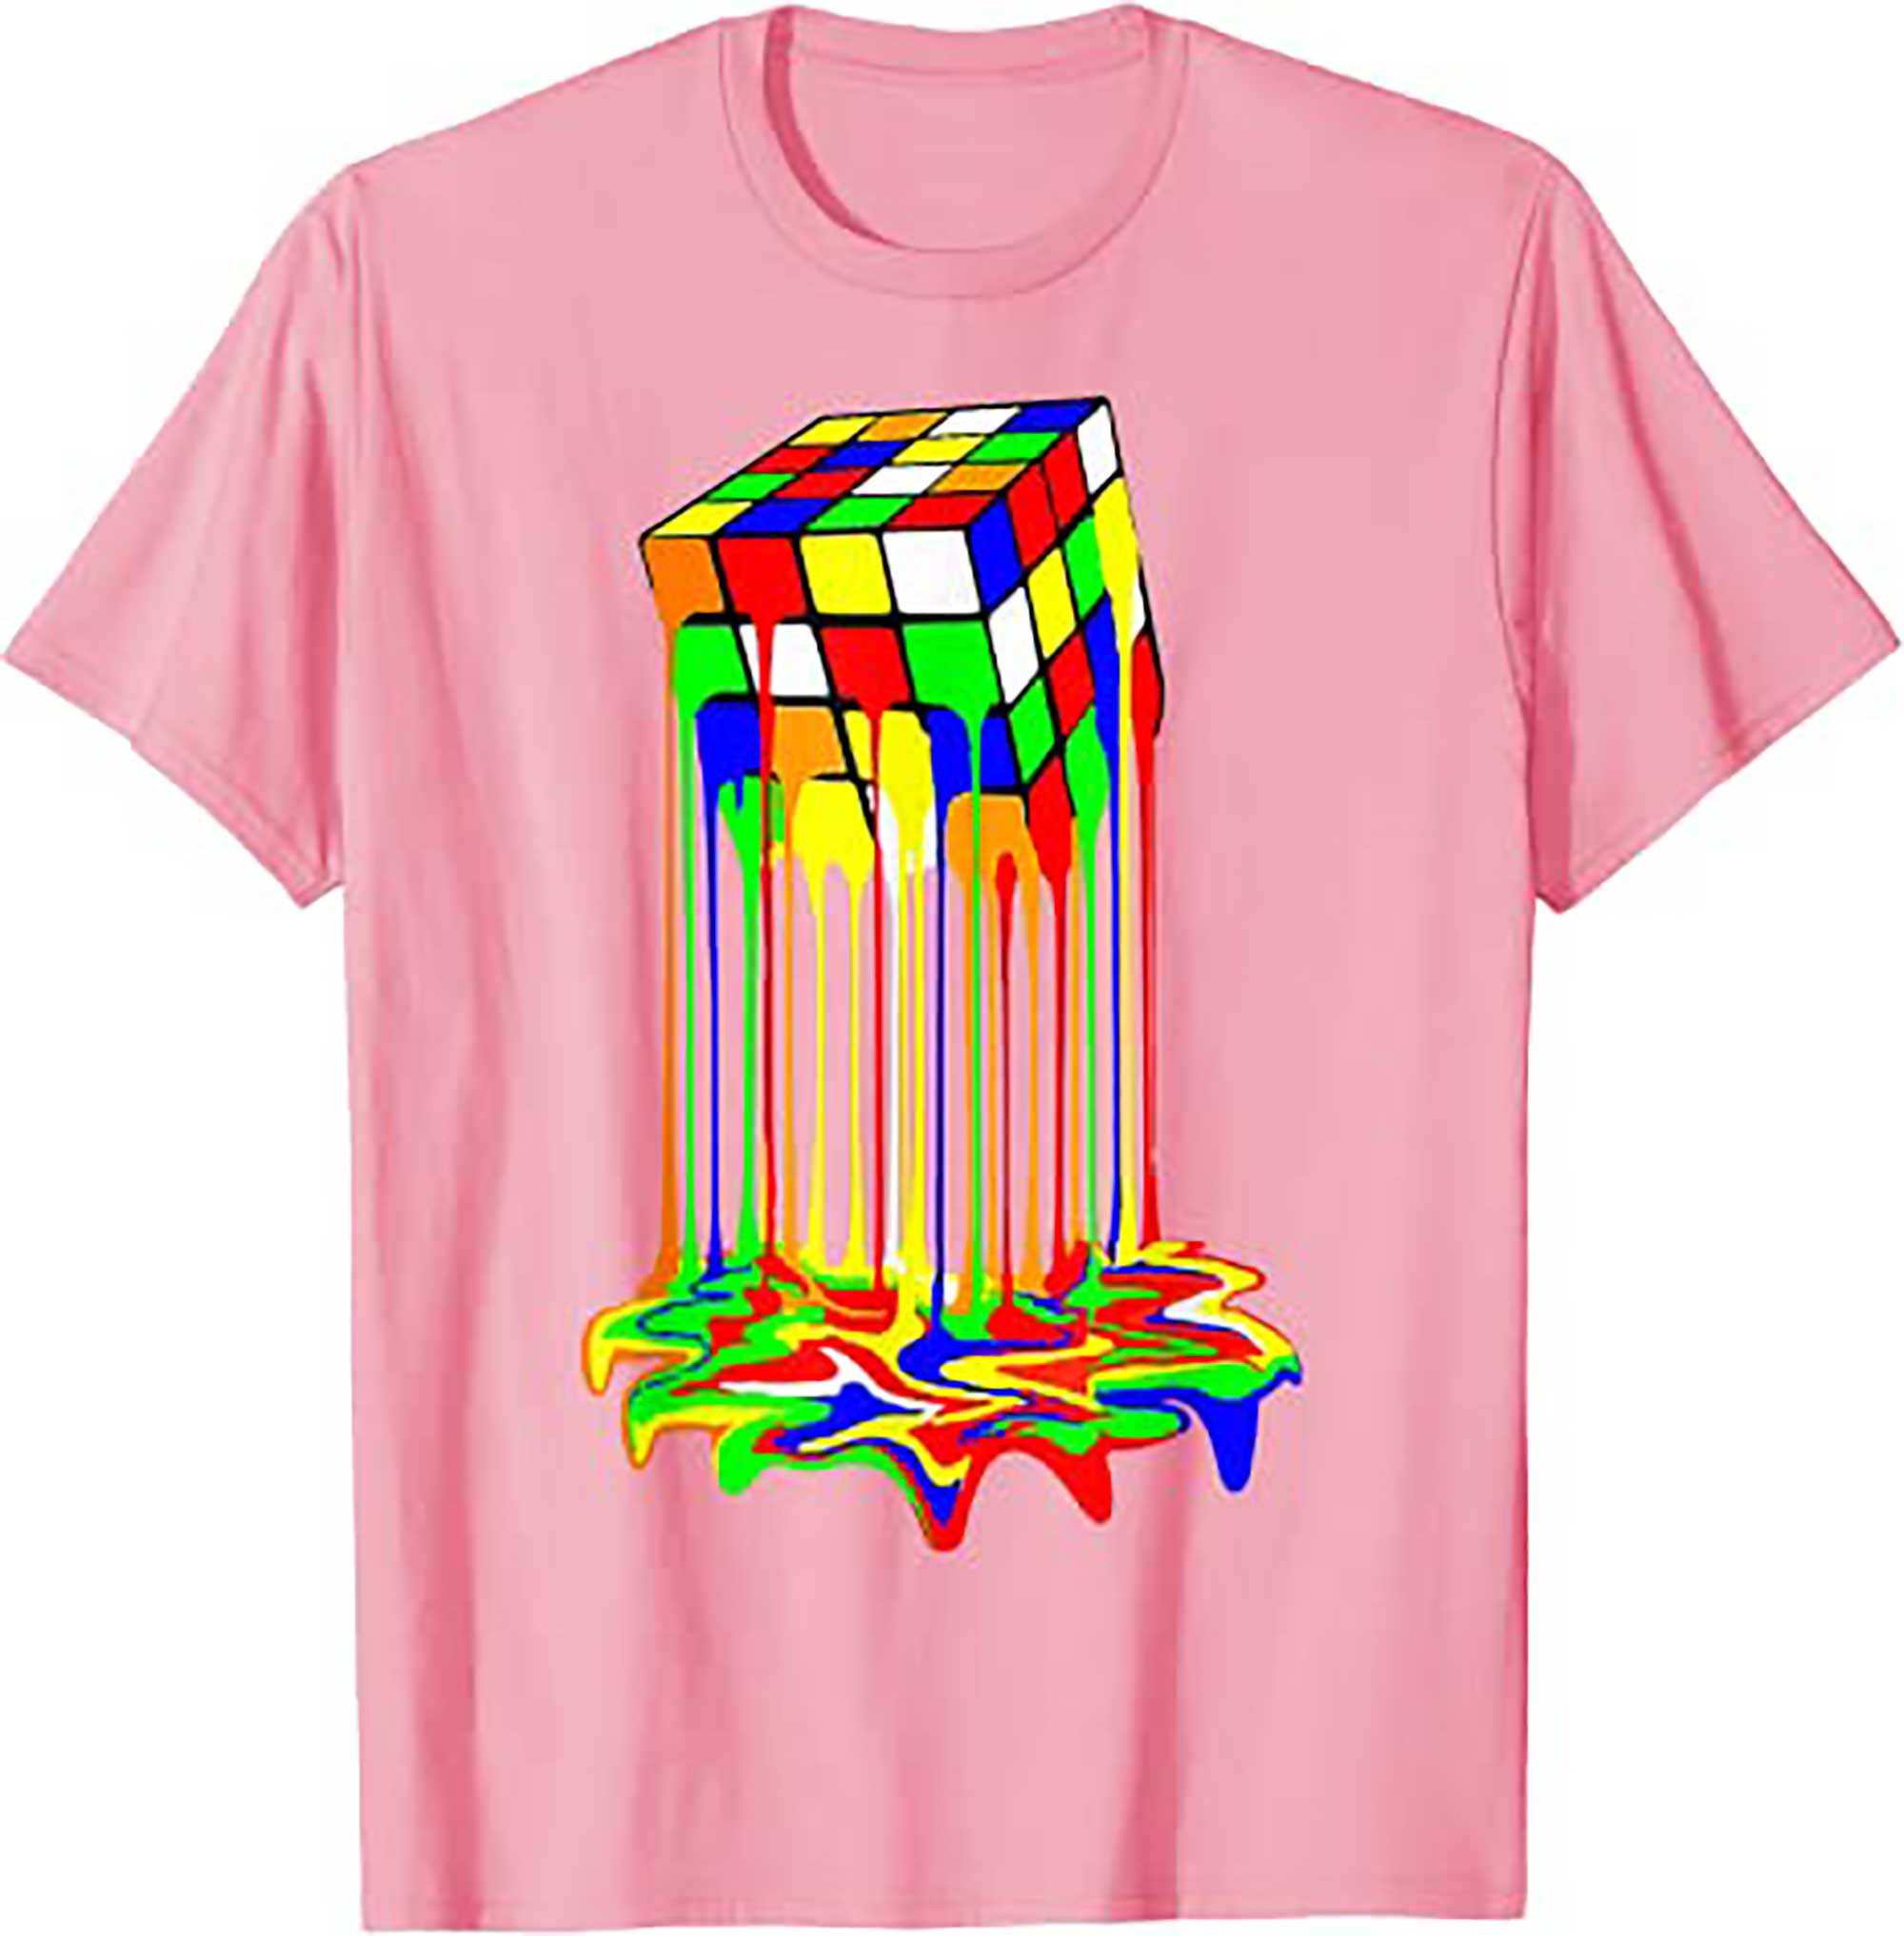 cube colorful awesome graphic T Shirt